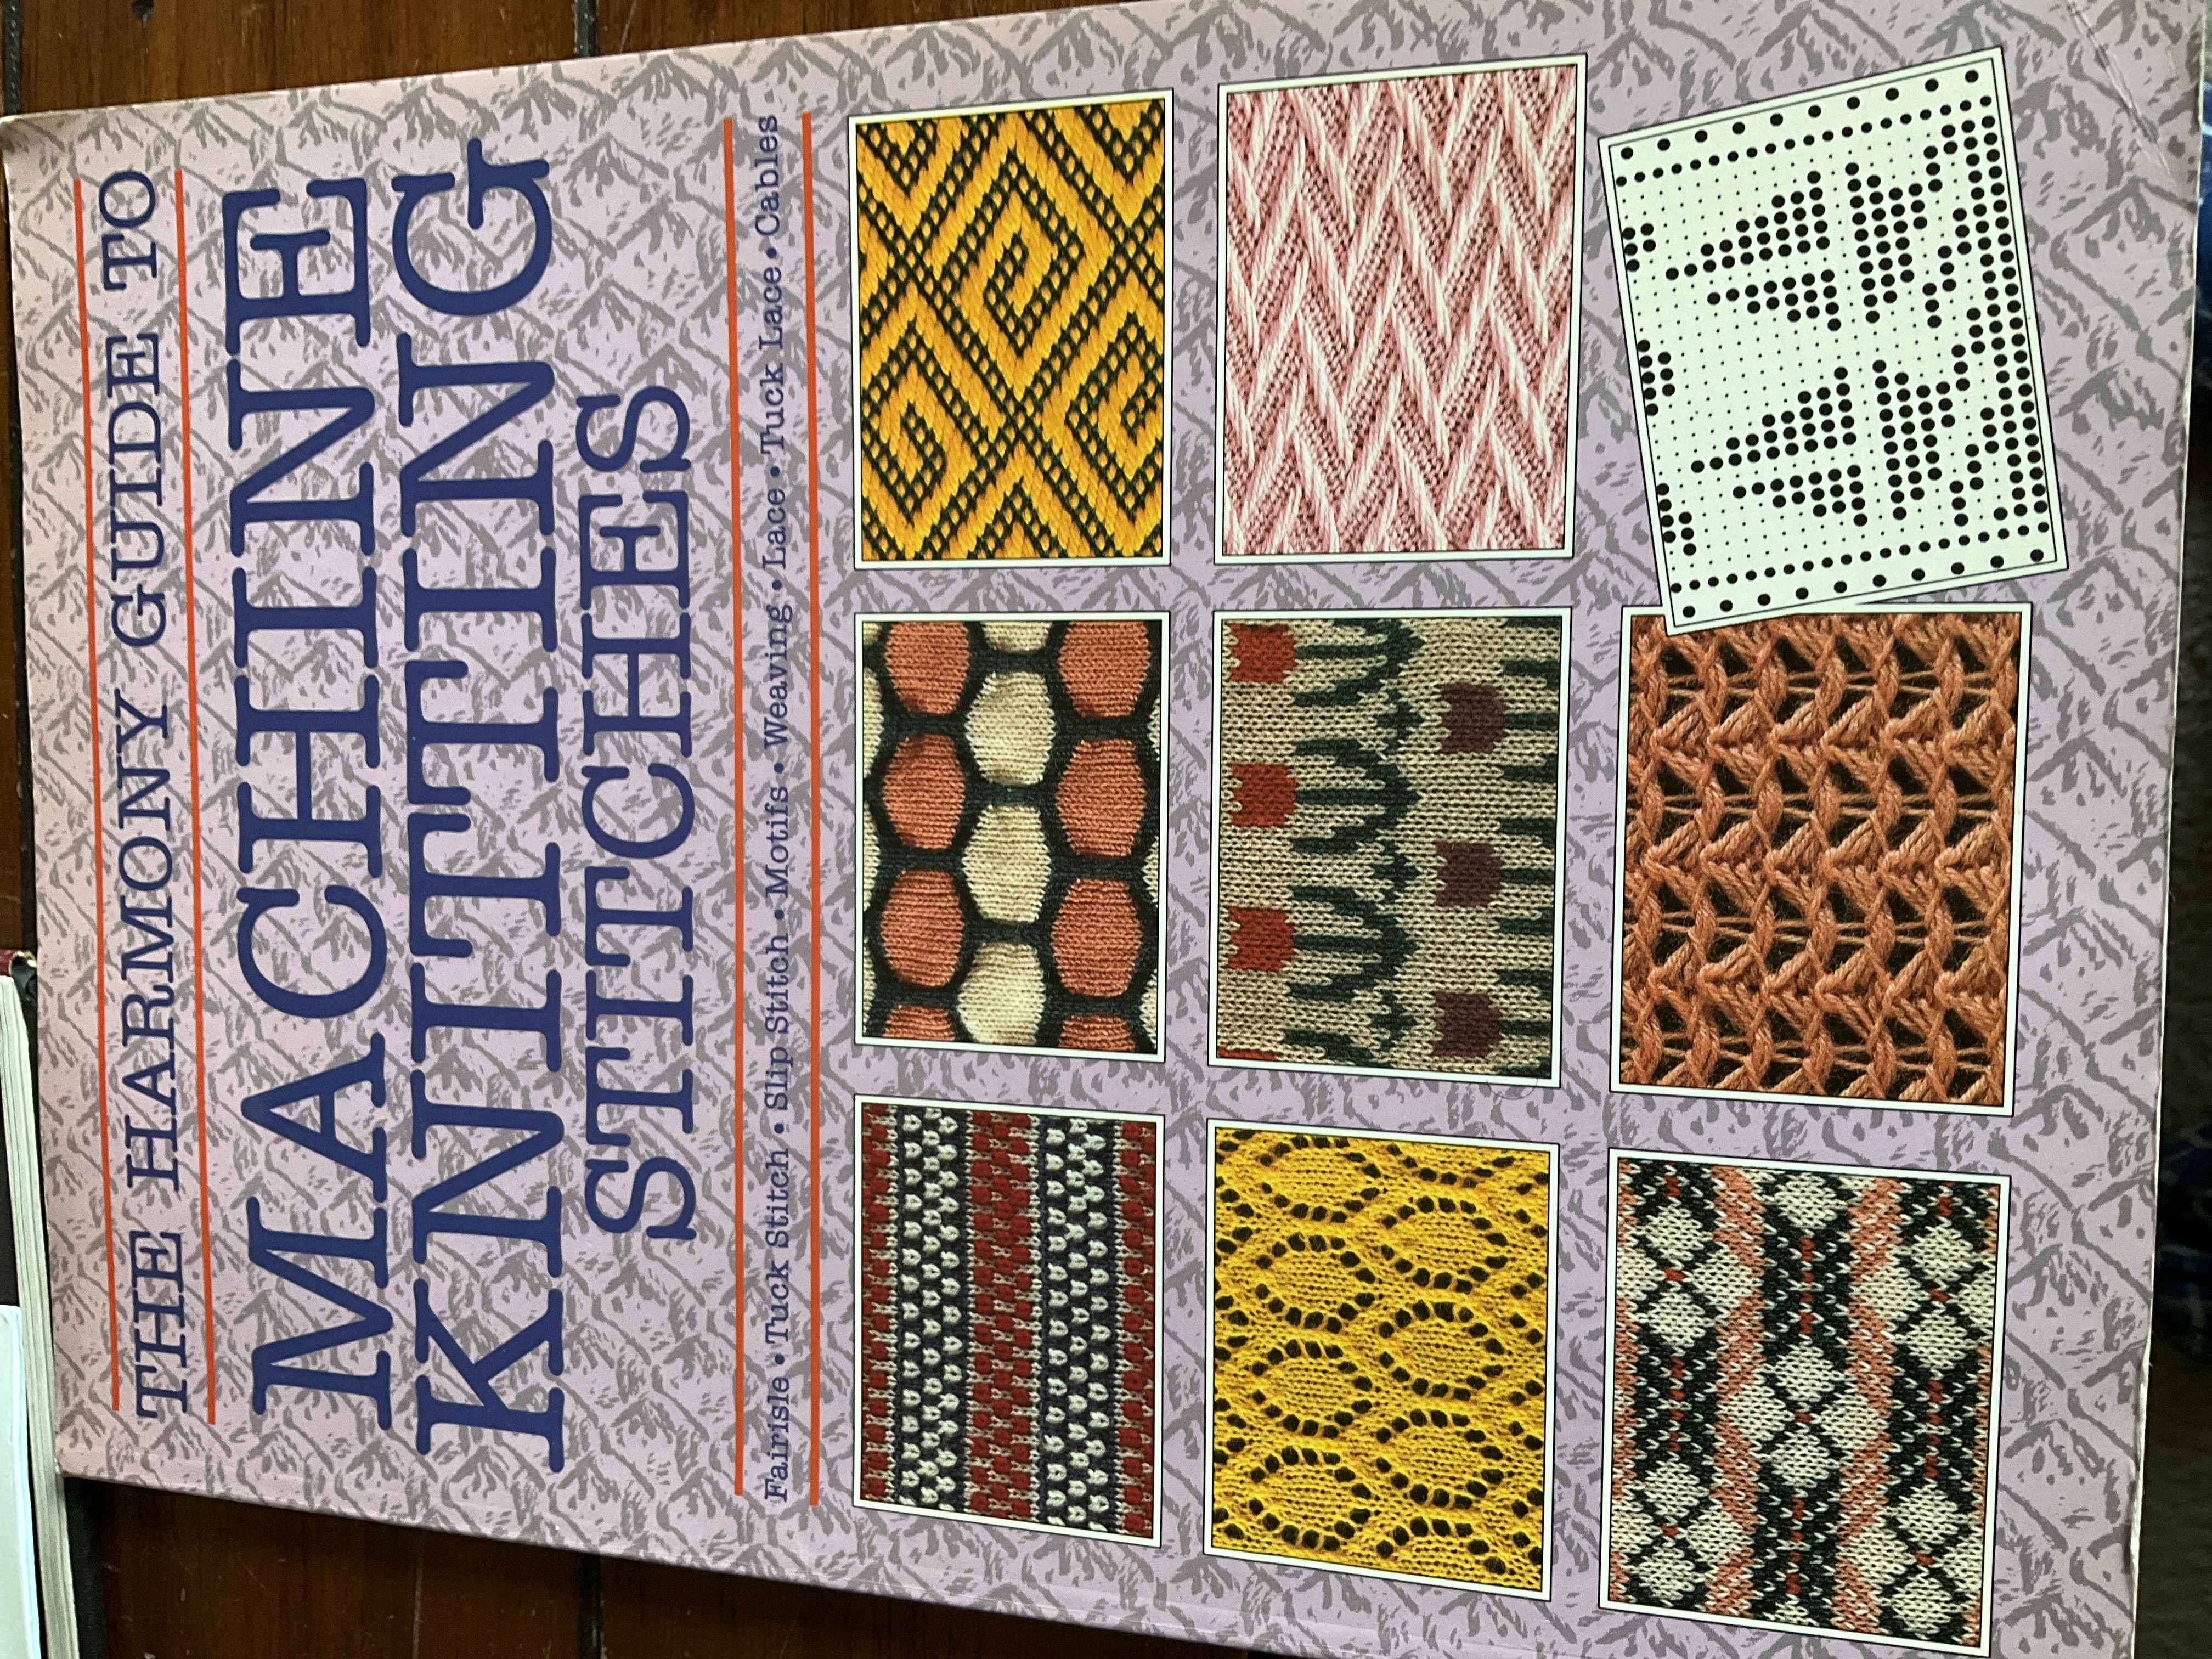 The Harmony Guide to Machine Knitting Stitches